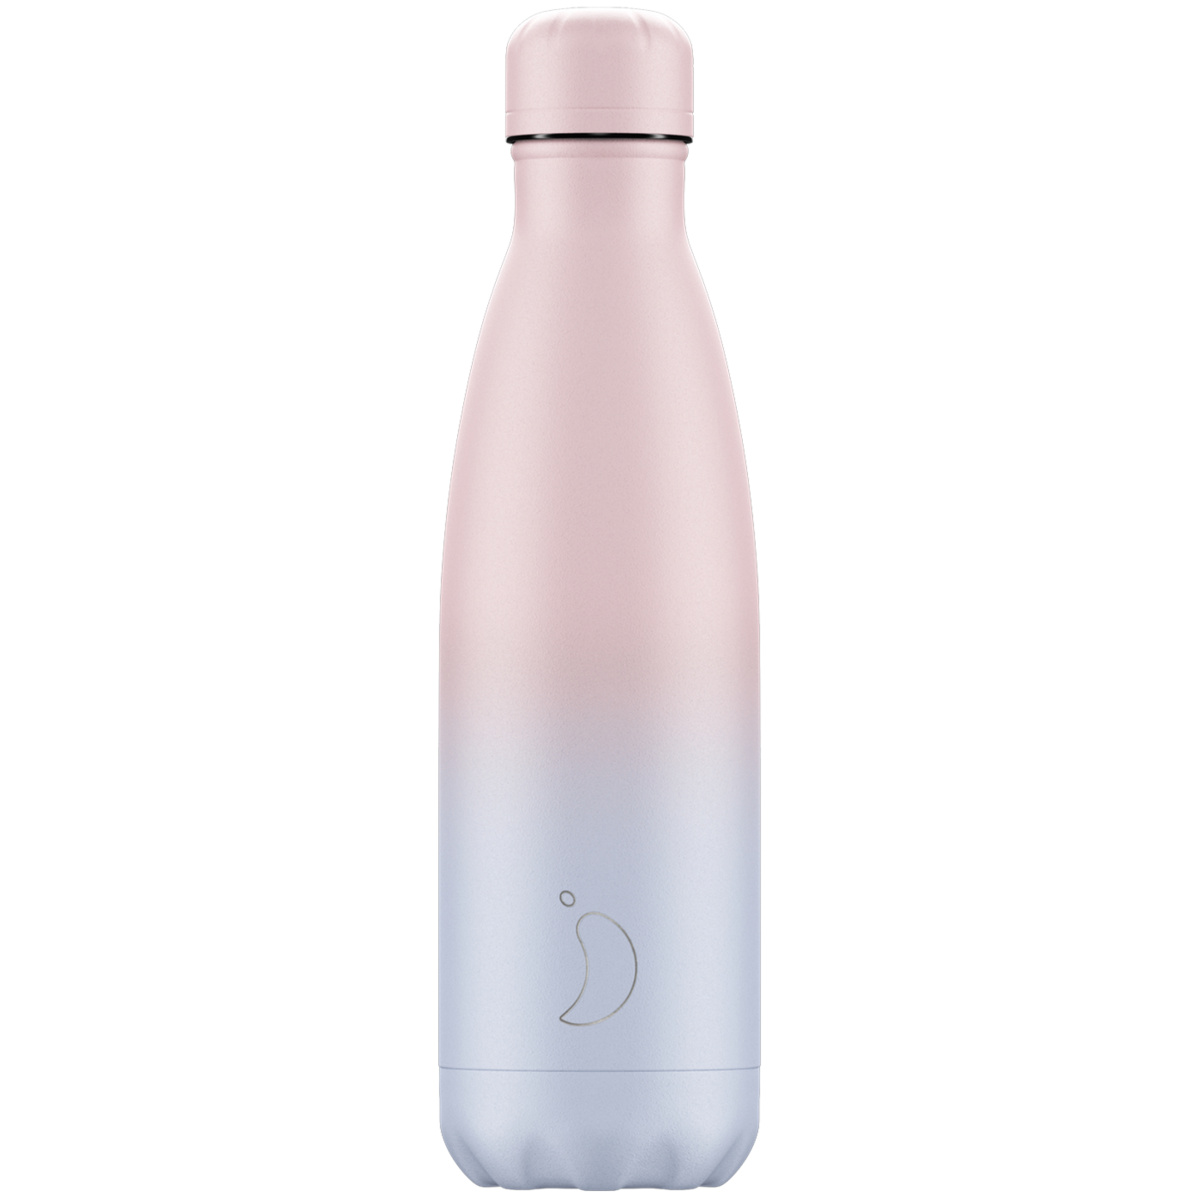 Chilly's thermo drink bottle - Blush